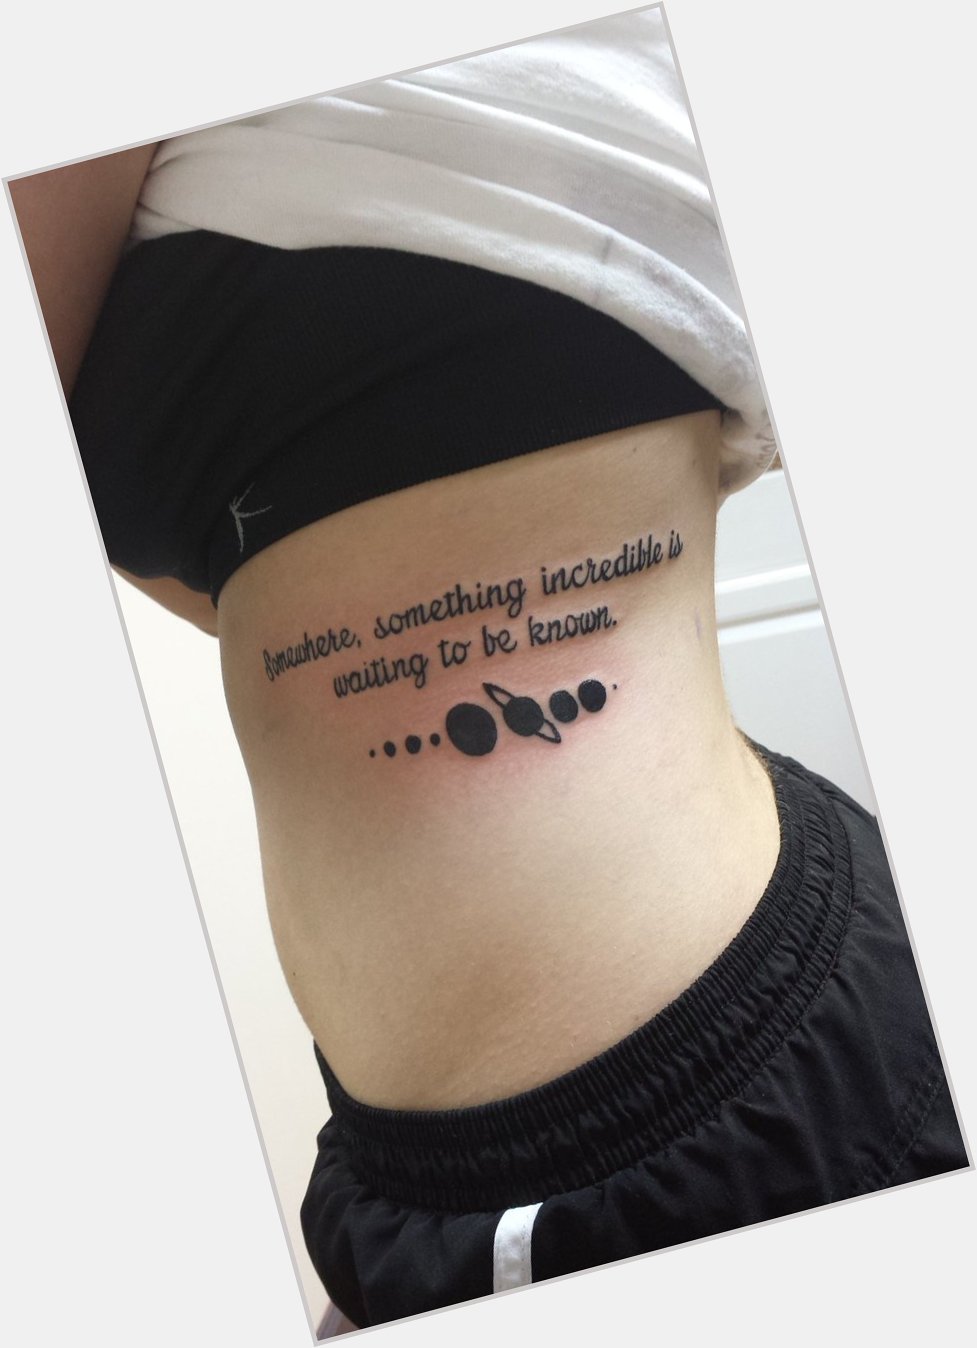 Happy birthday to the man, the legend, Carl Sagan. Even got a tattoo of a quote by him  